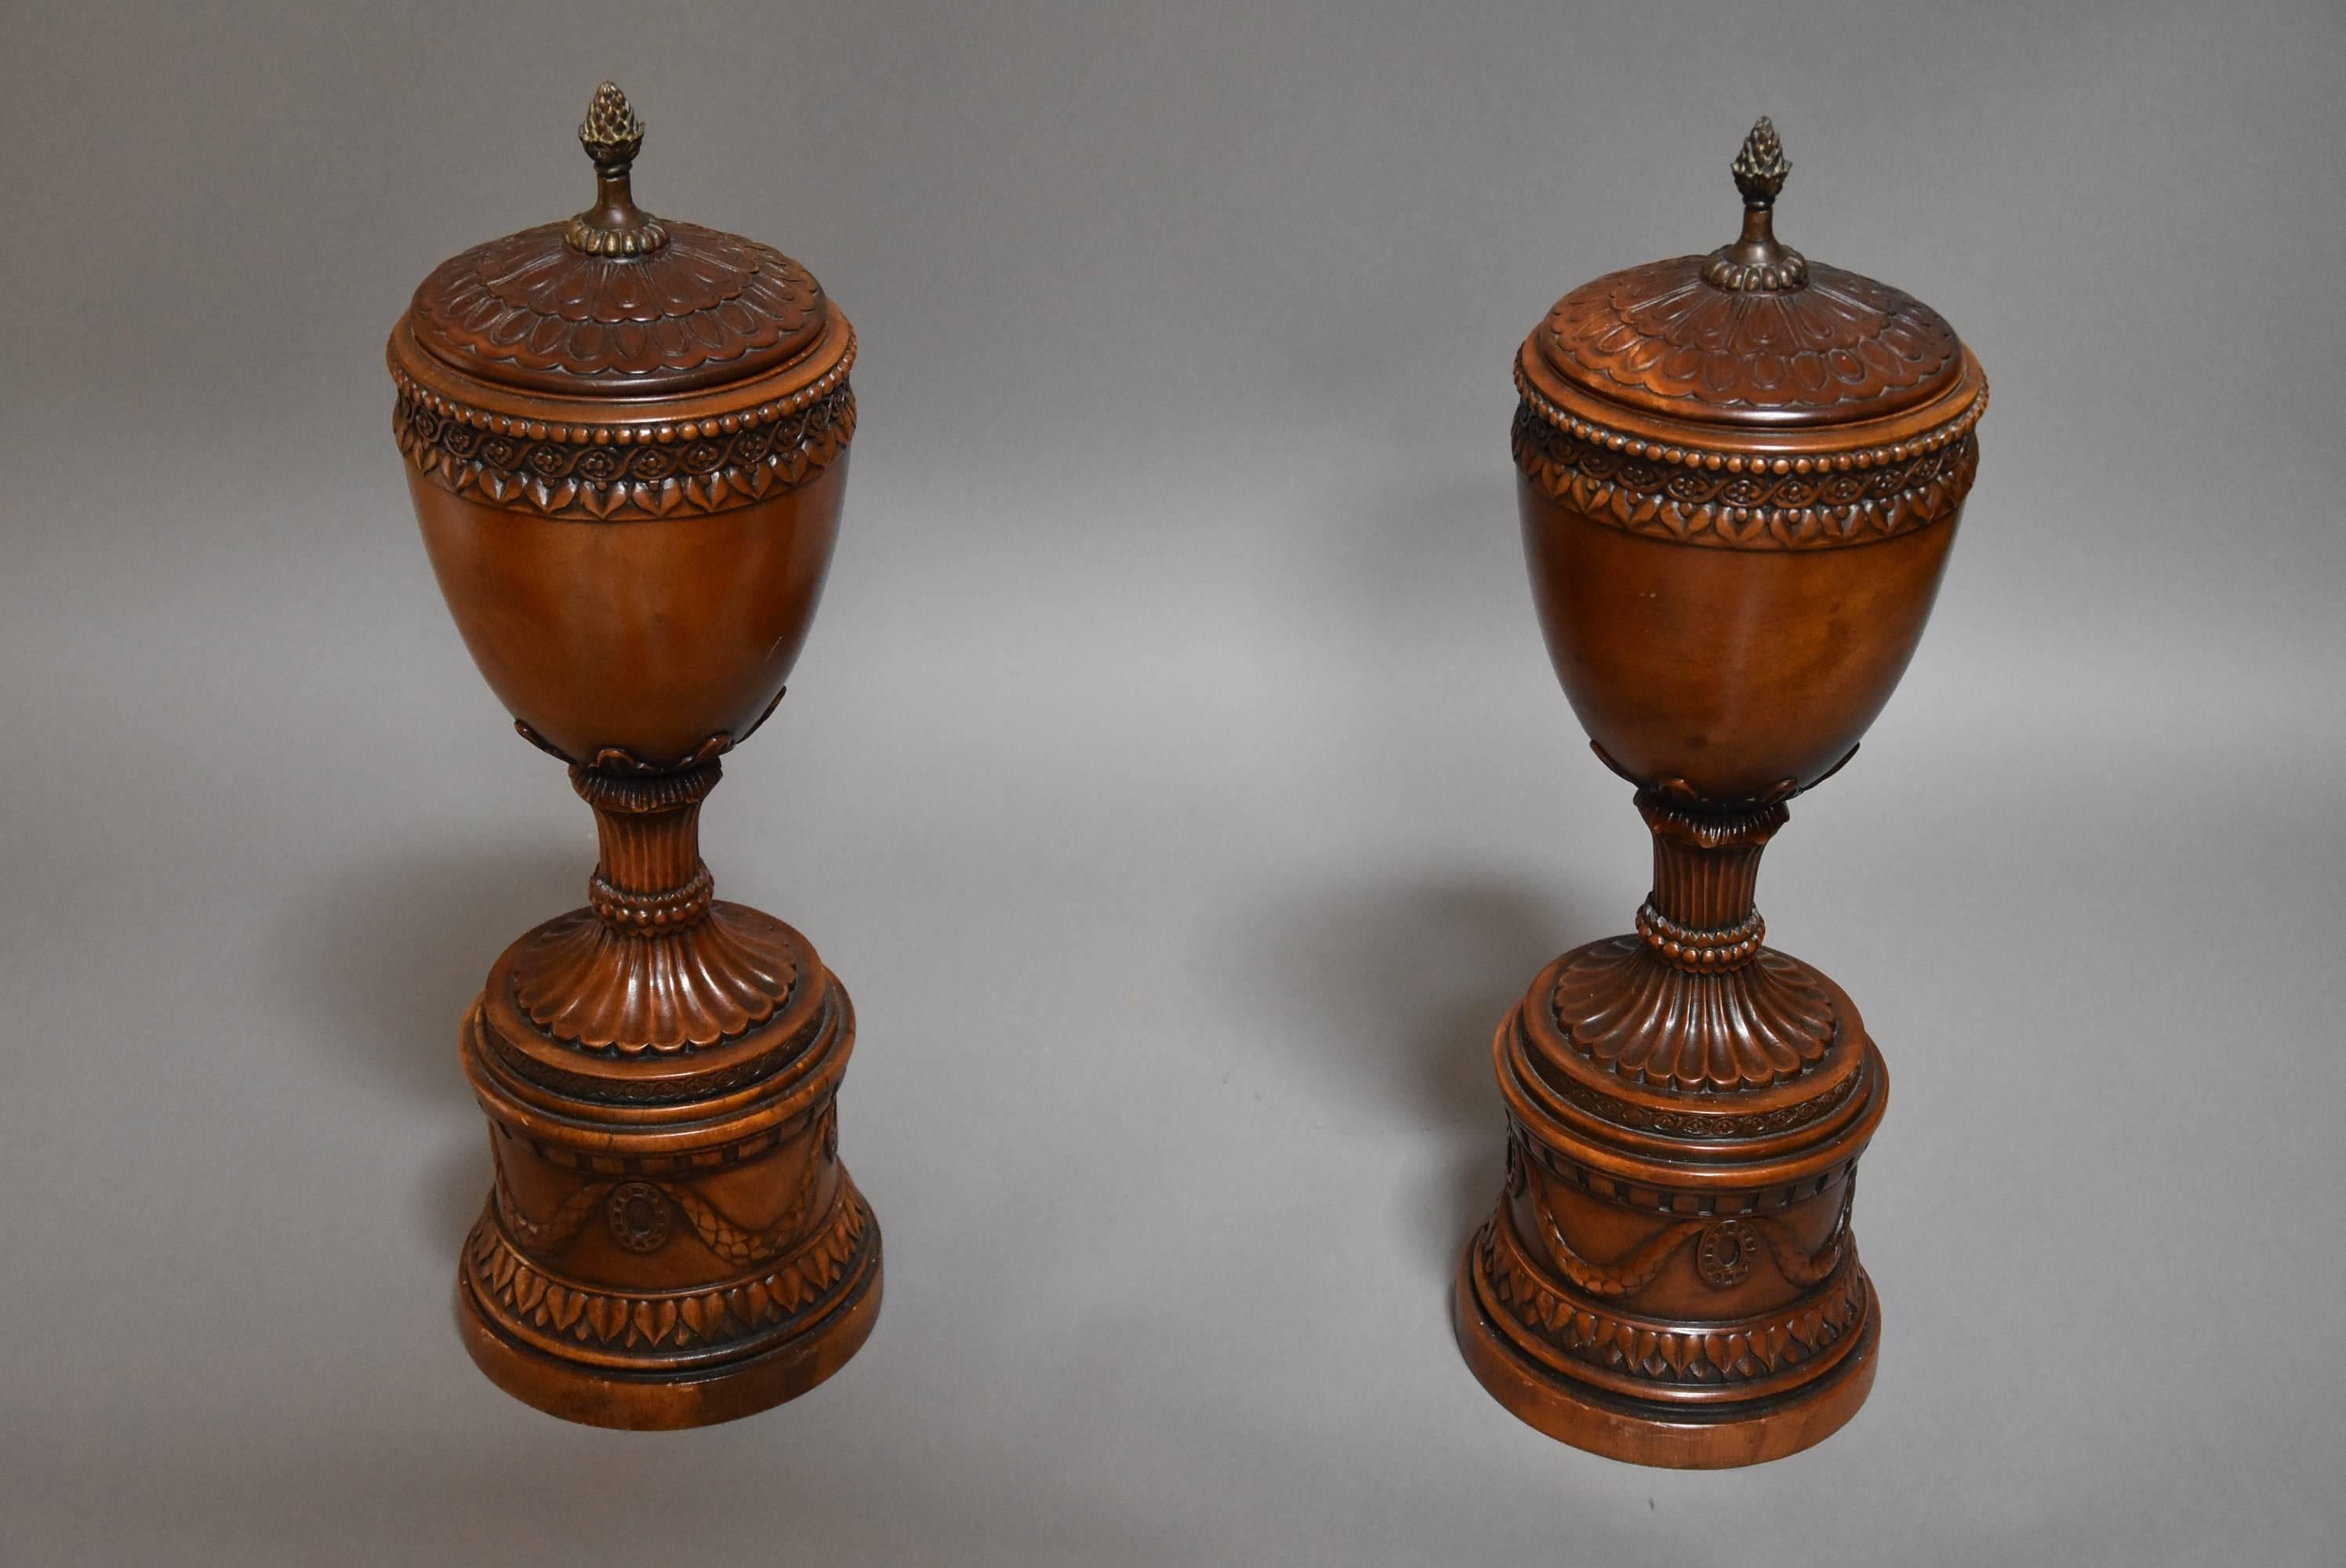 English Pair of Early 20th Century Decorative Wooden Urns with Lids